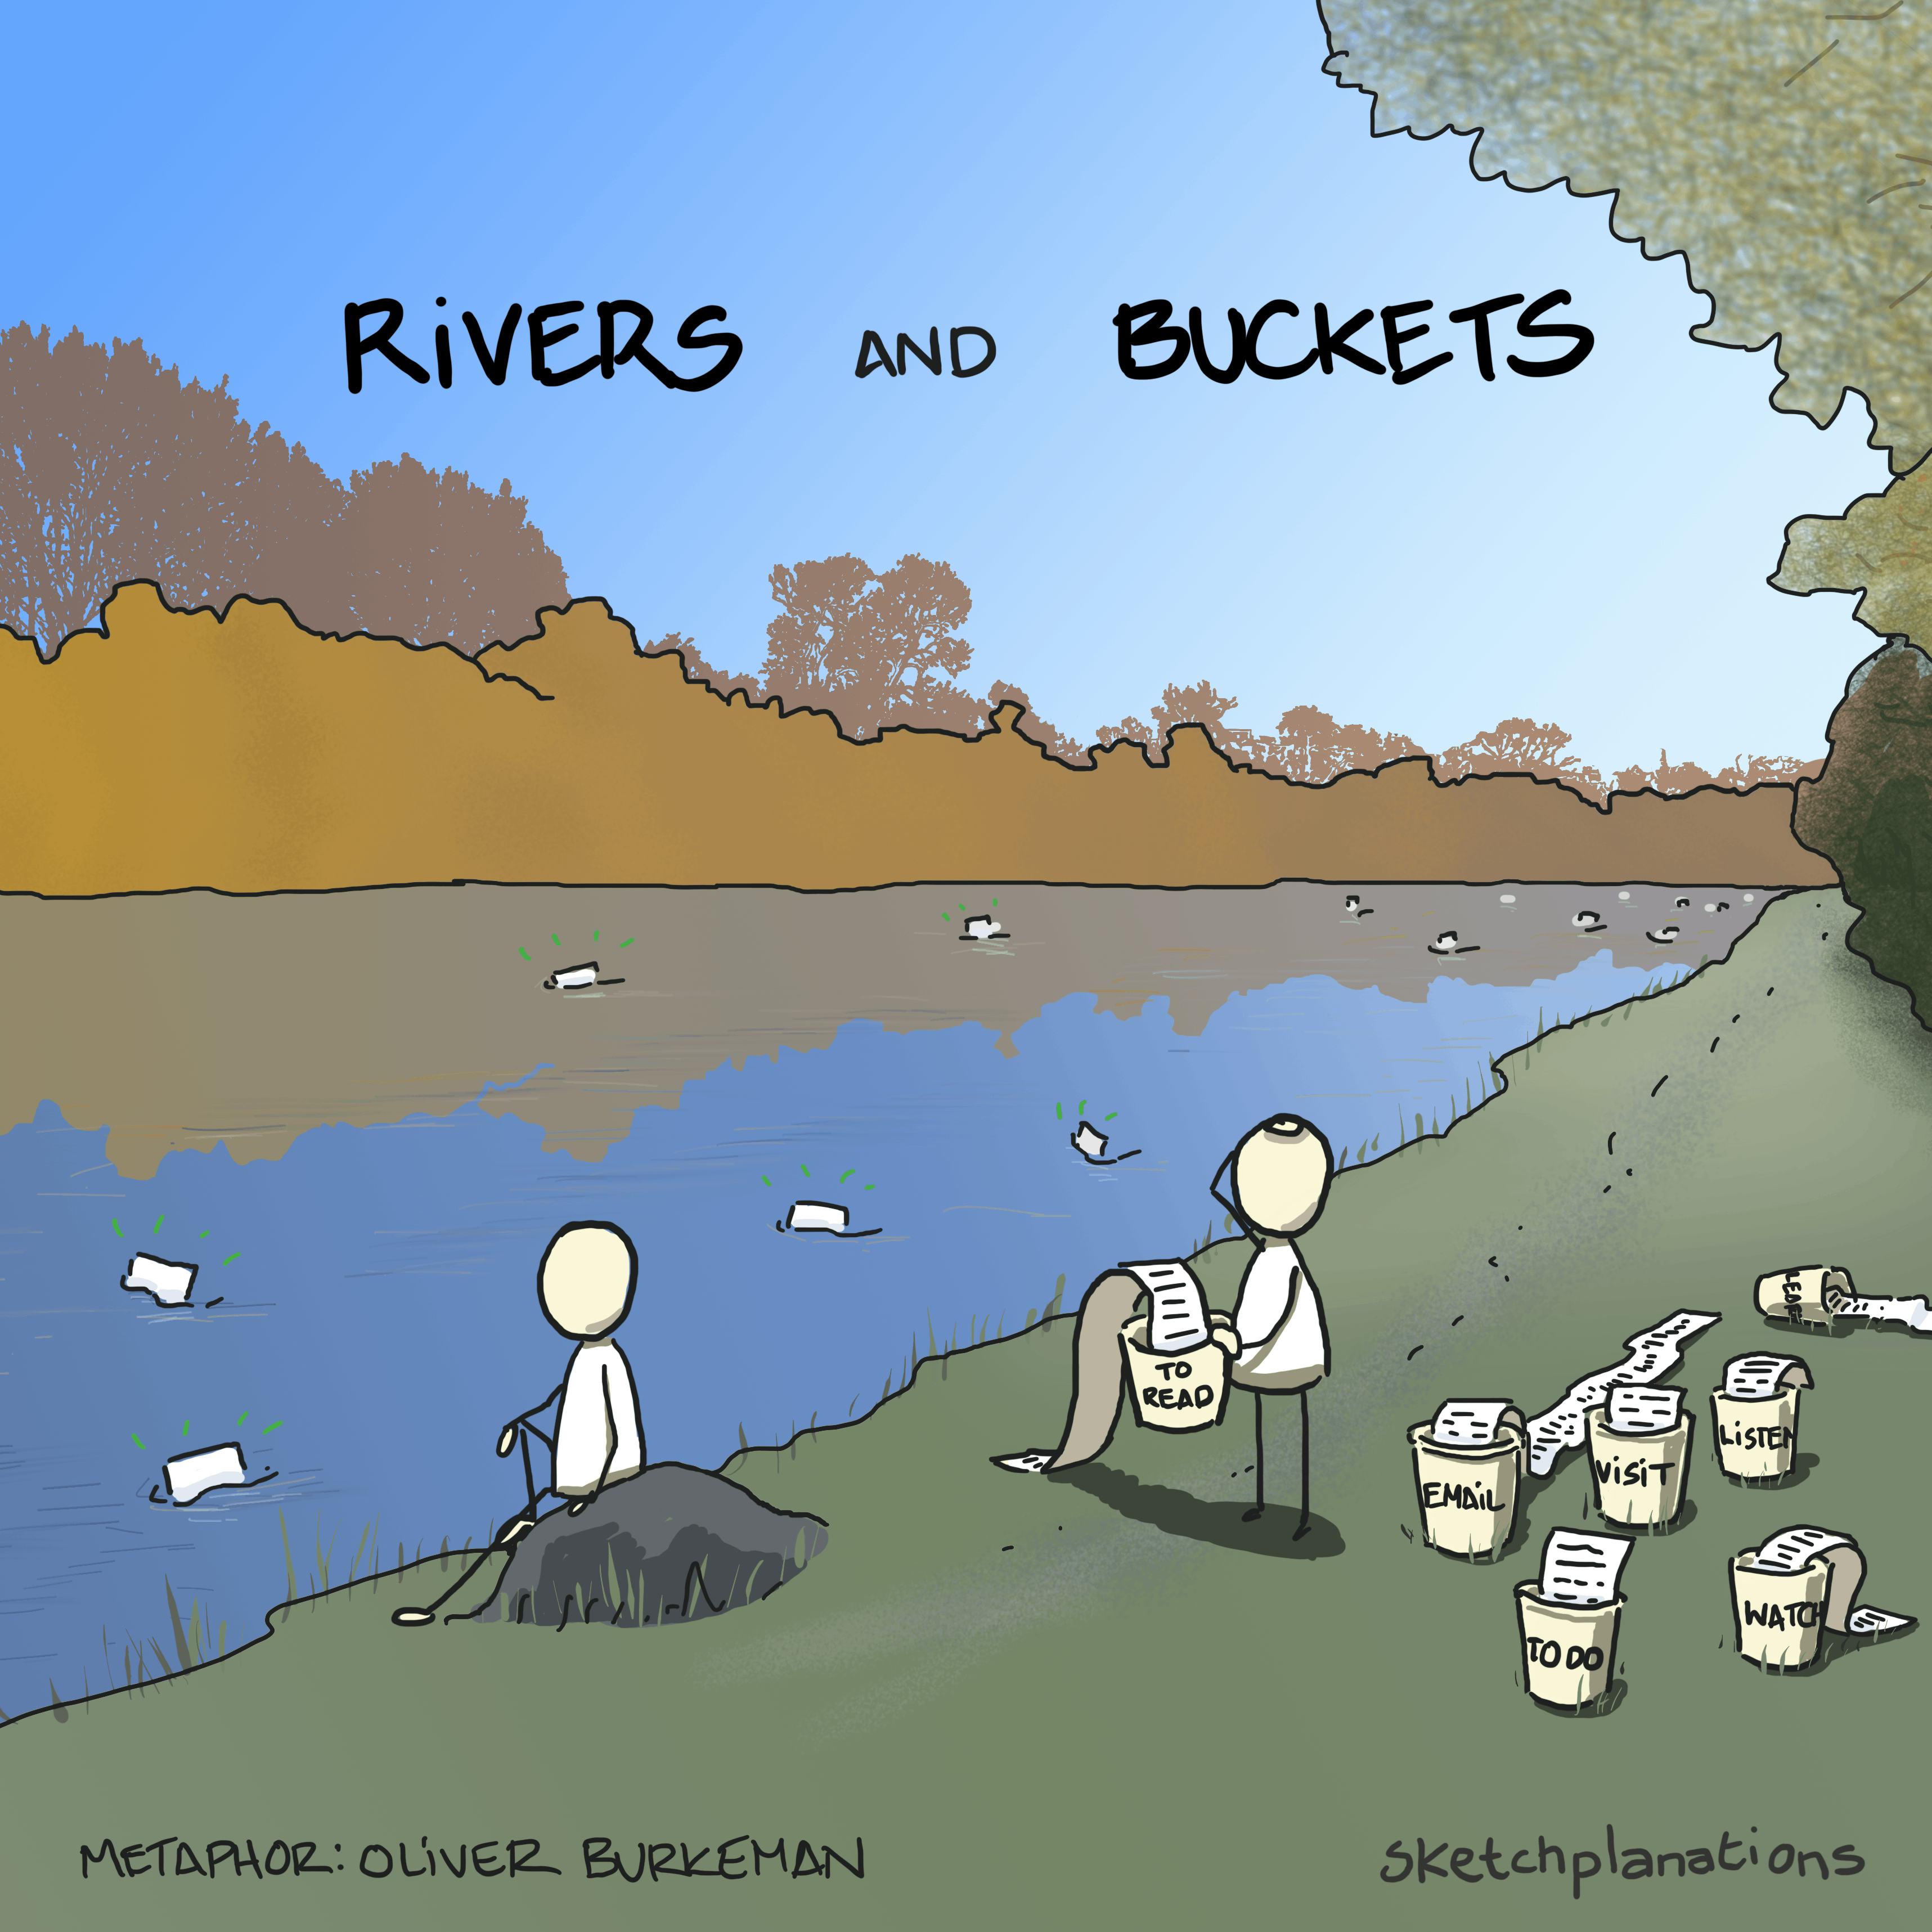 Rivers and buckets metaphor illustration: one person sits calmly by a river watching interesting things go by, another gently stresses holding a bucket with an overflowing list surrounded by more buckets on the floor, each with long lists